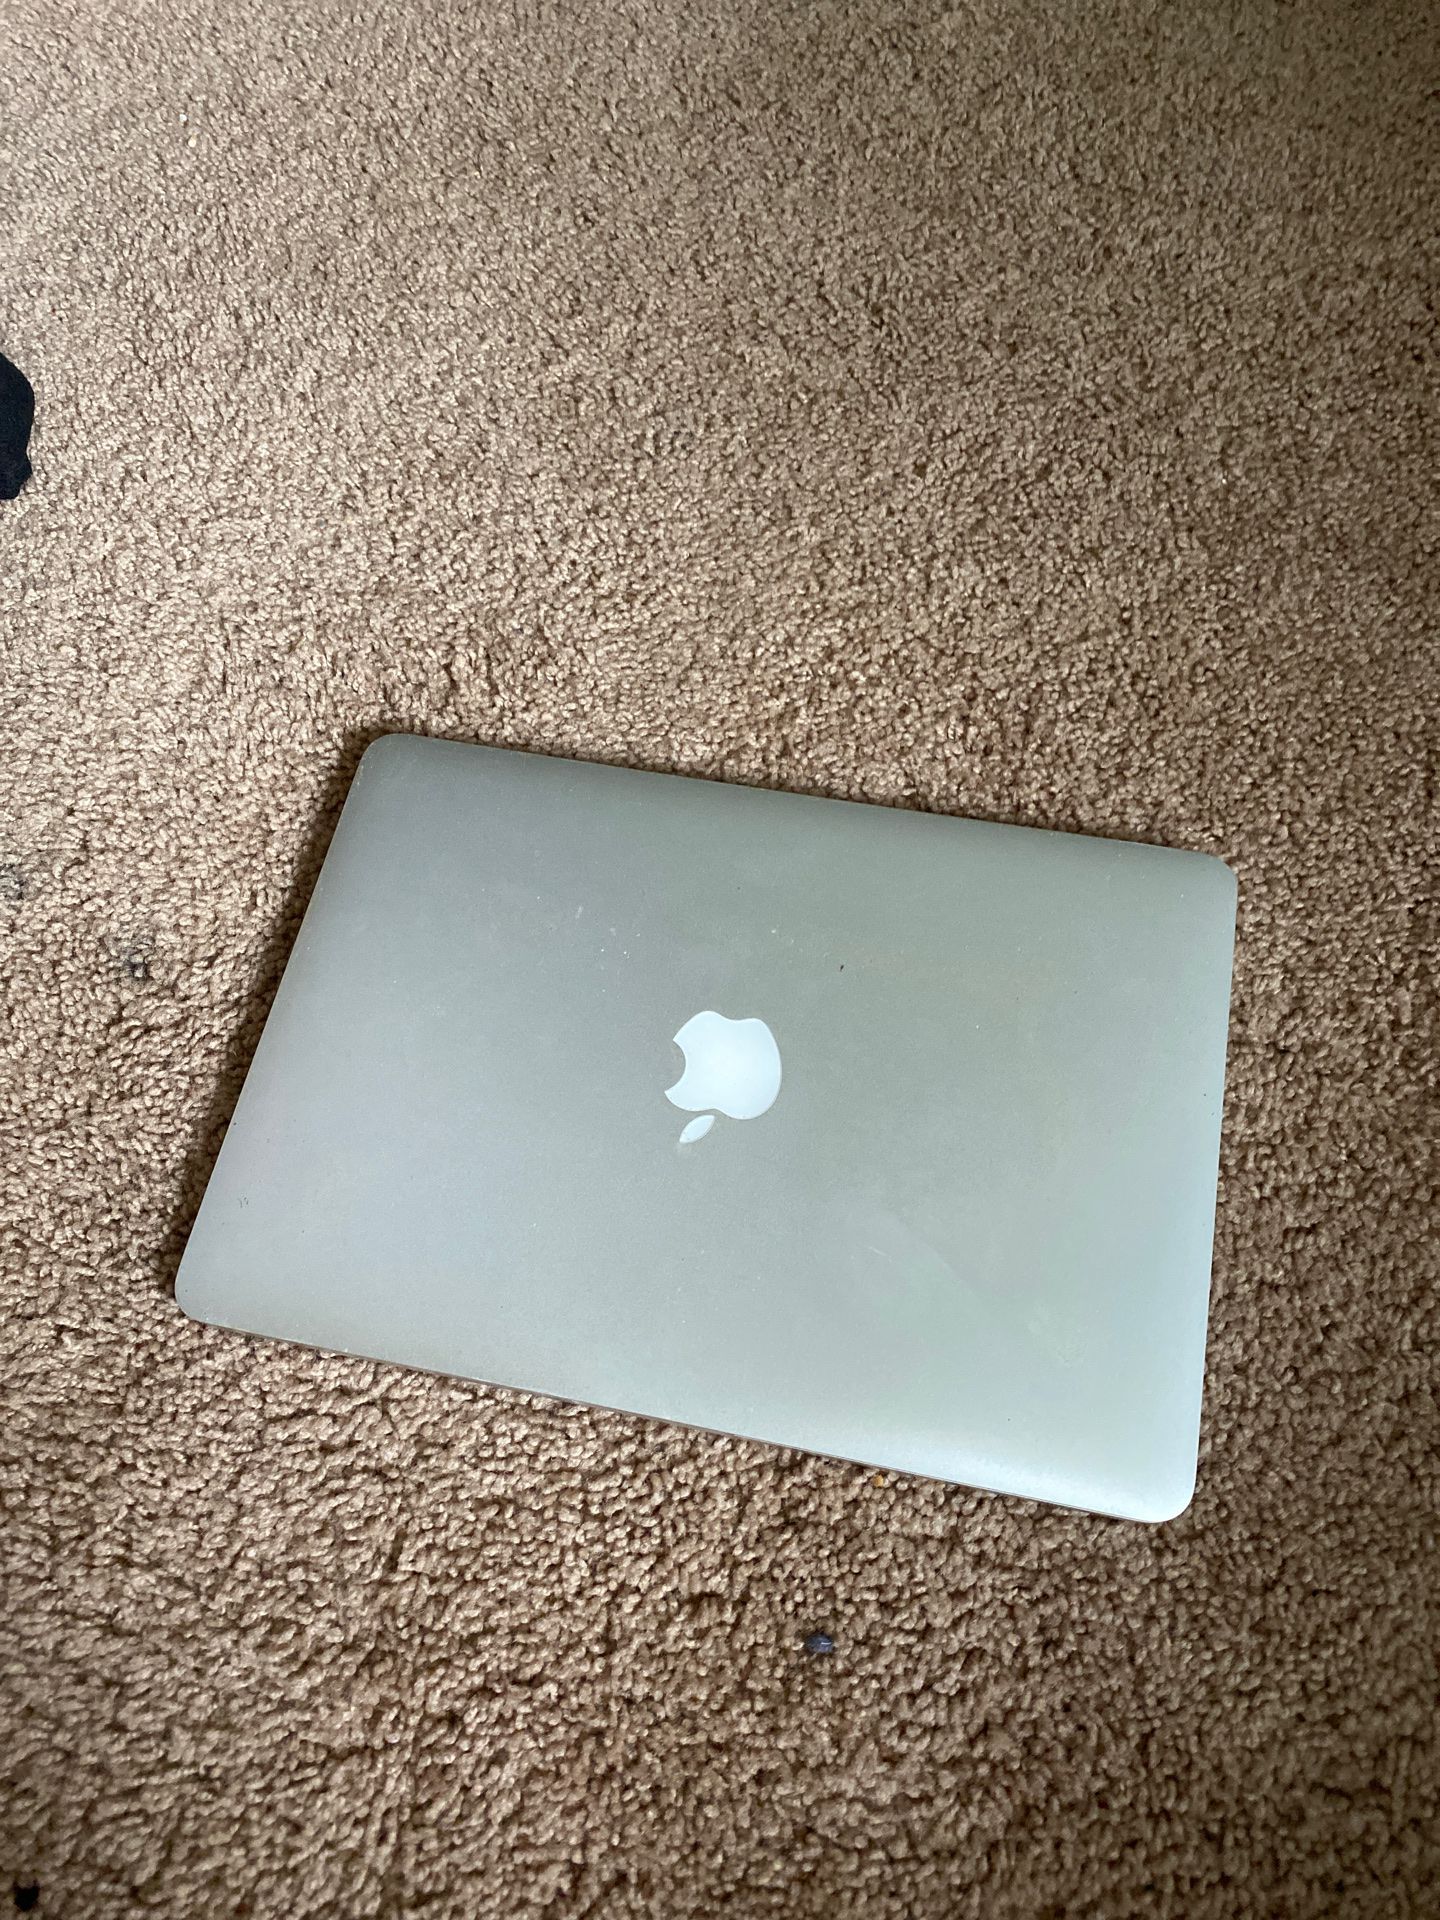 MacBook Pro 2013, model A1502 with an Apple wireless Mouse